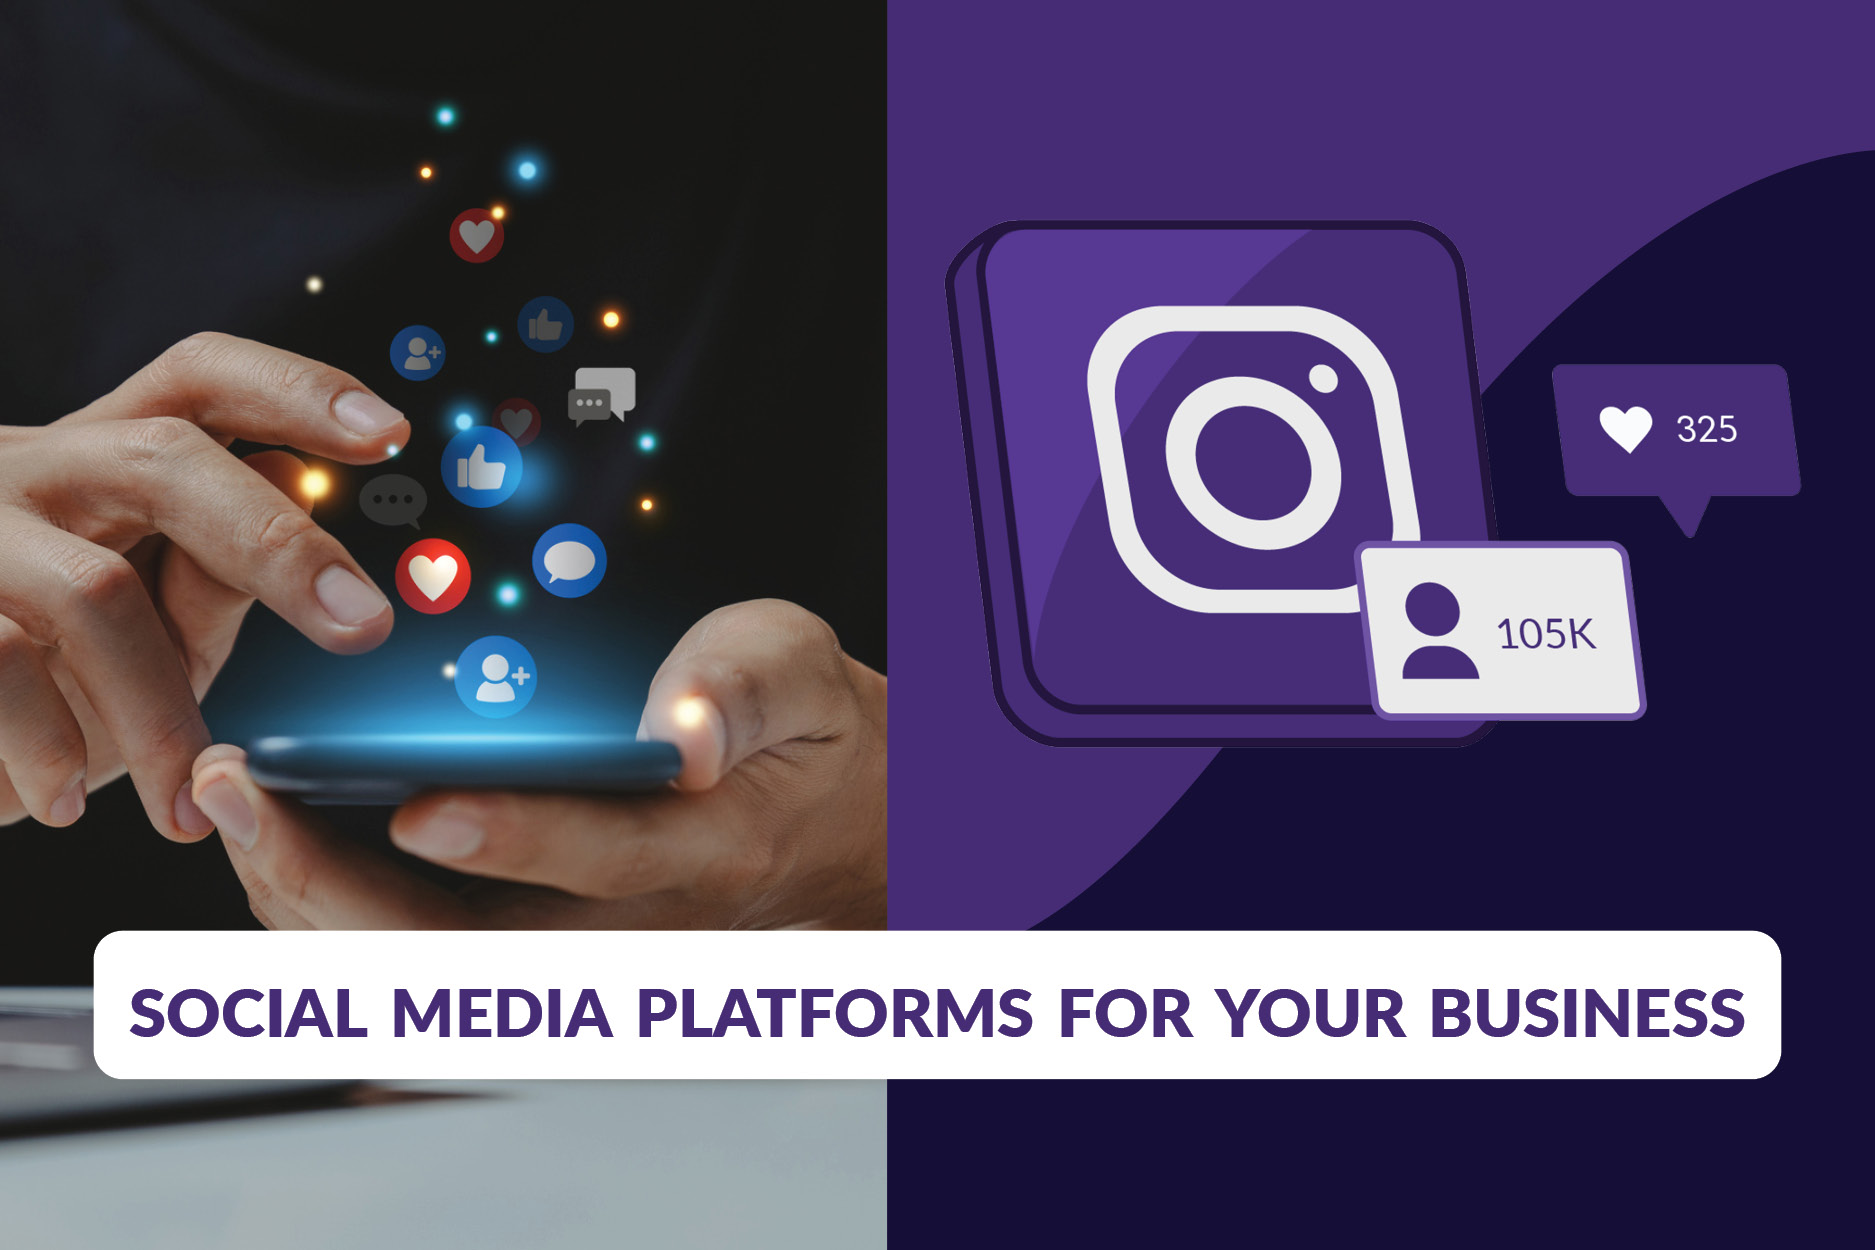 Hand hovering over a phone with social media icons, selecting which is best for a small business